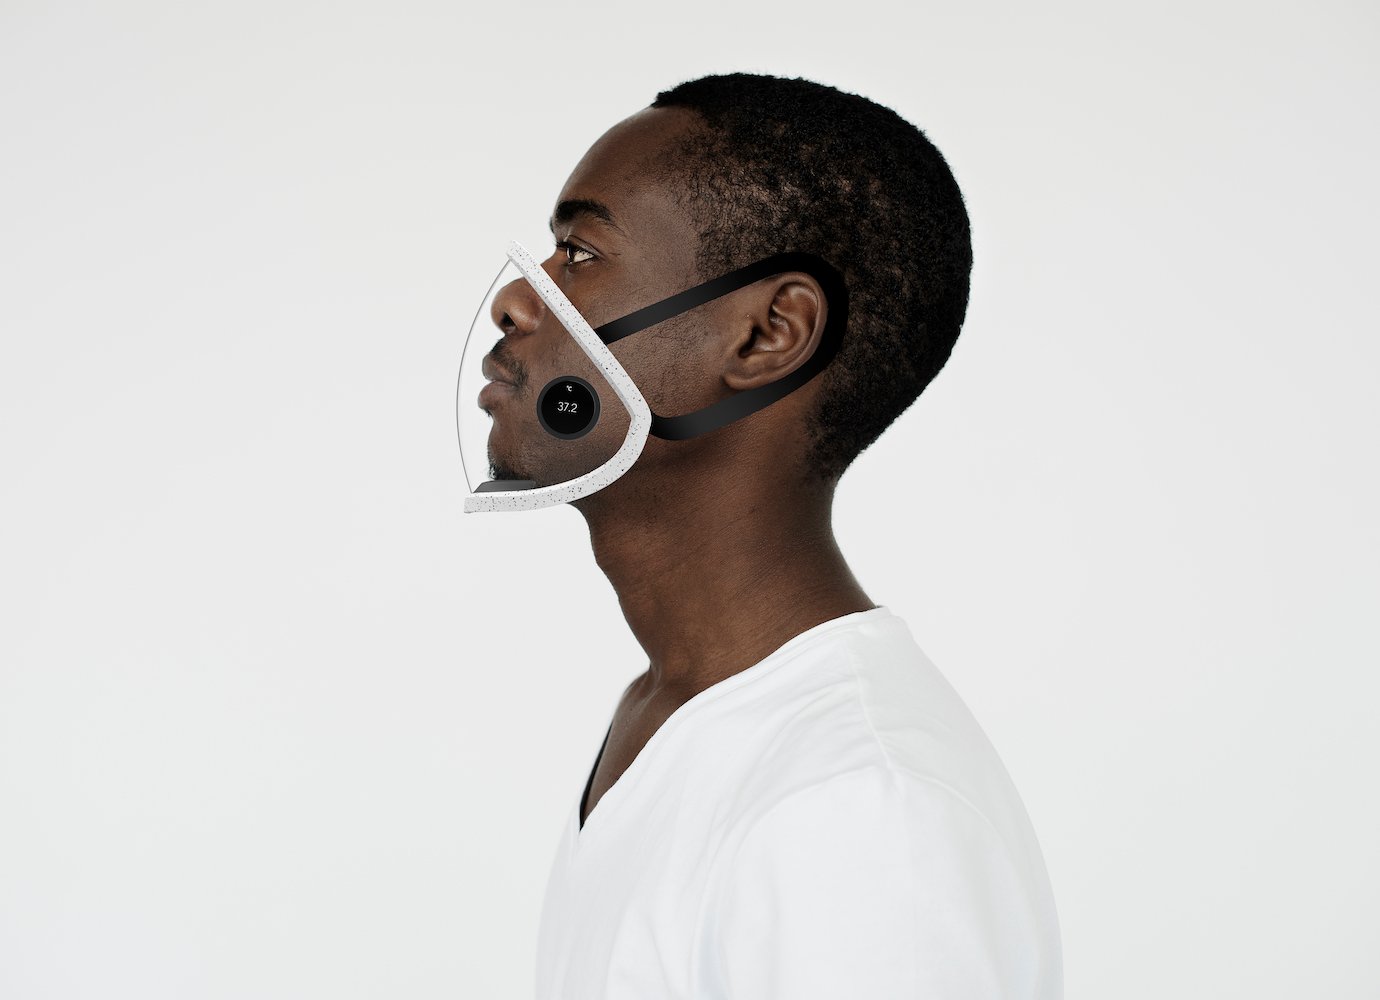 Romanian designer wins MIT prize for high-tech face mask prototype